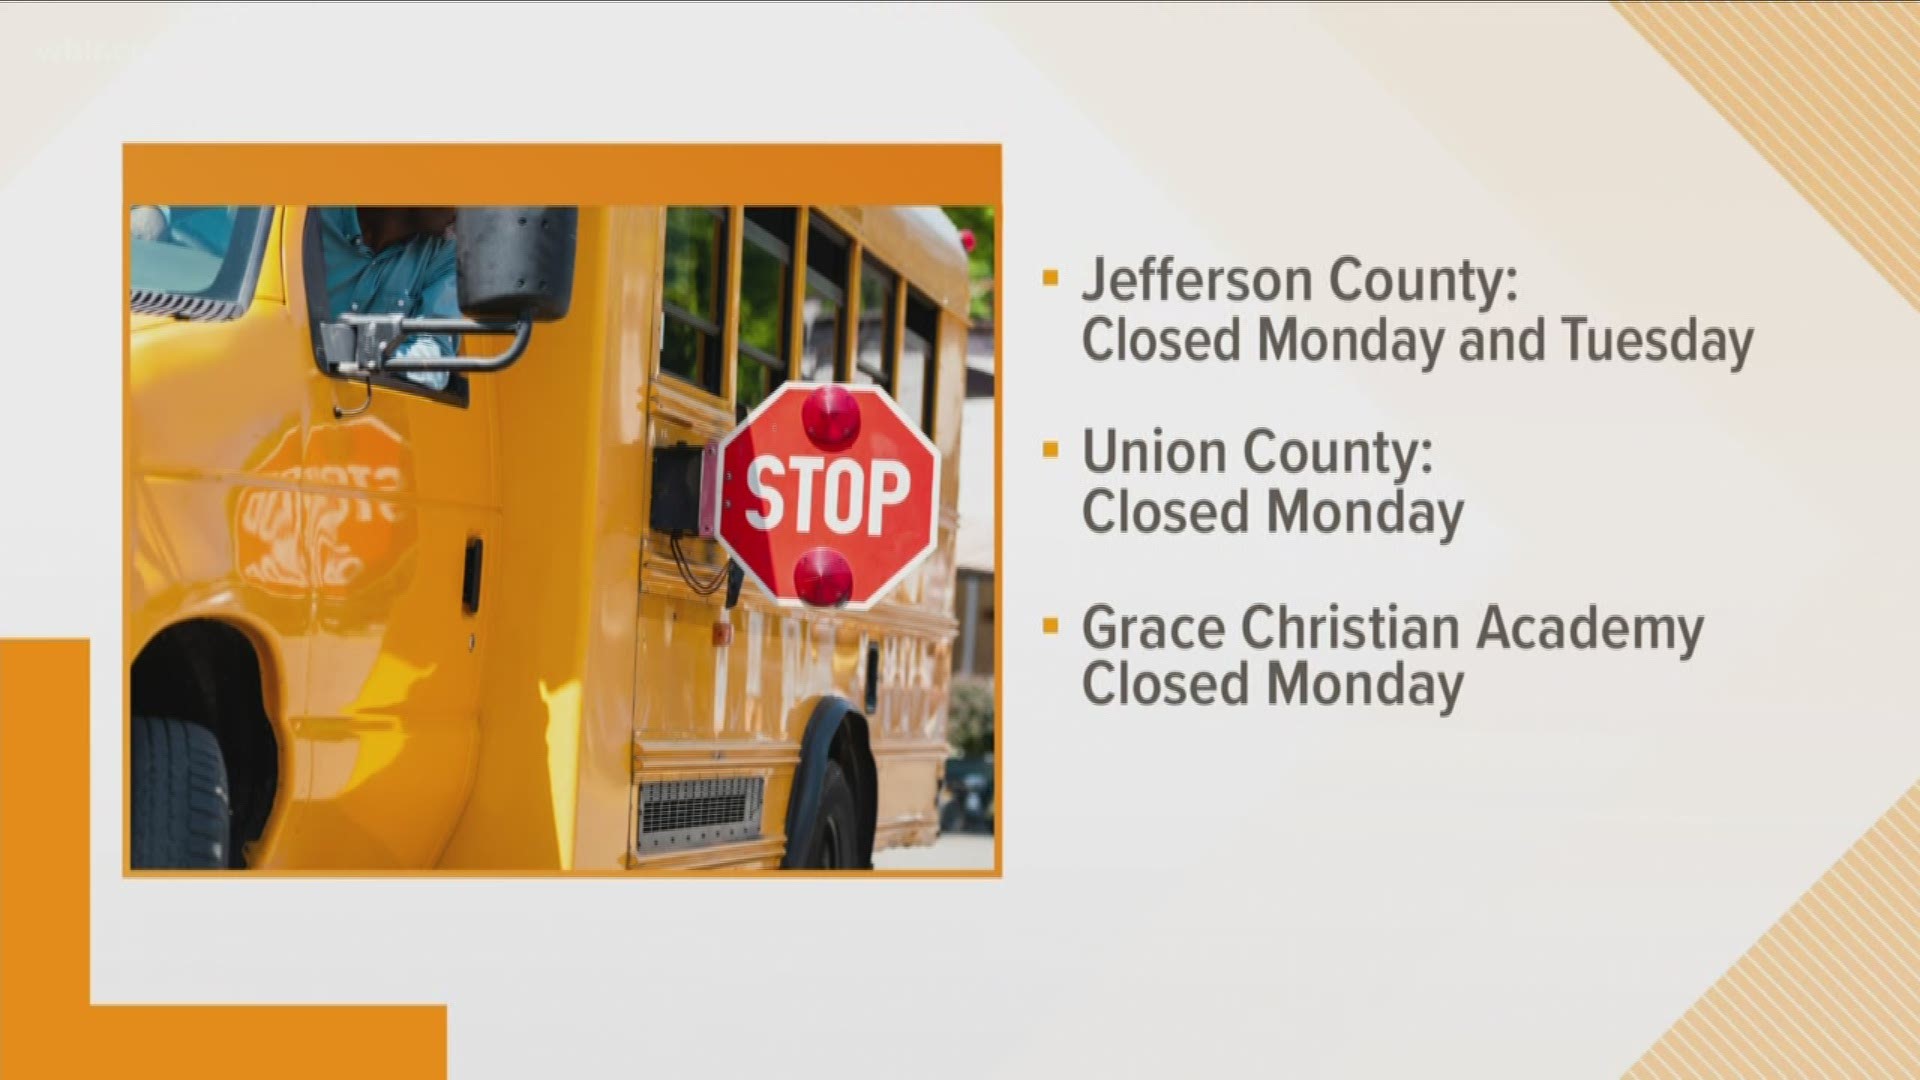 Union County Schools are closed Monday, while Jefferson County Schools are closed Monday and Tuesday too.